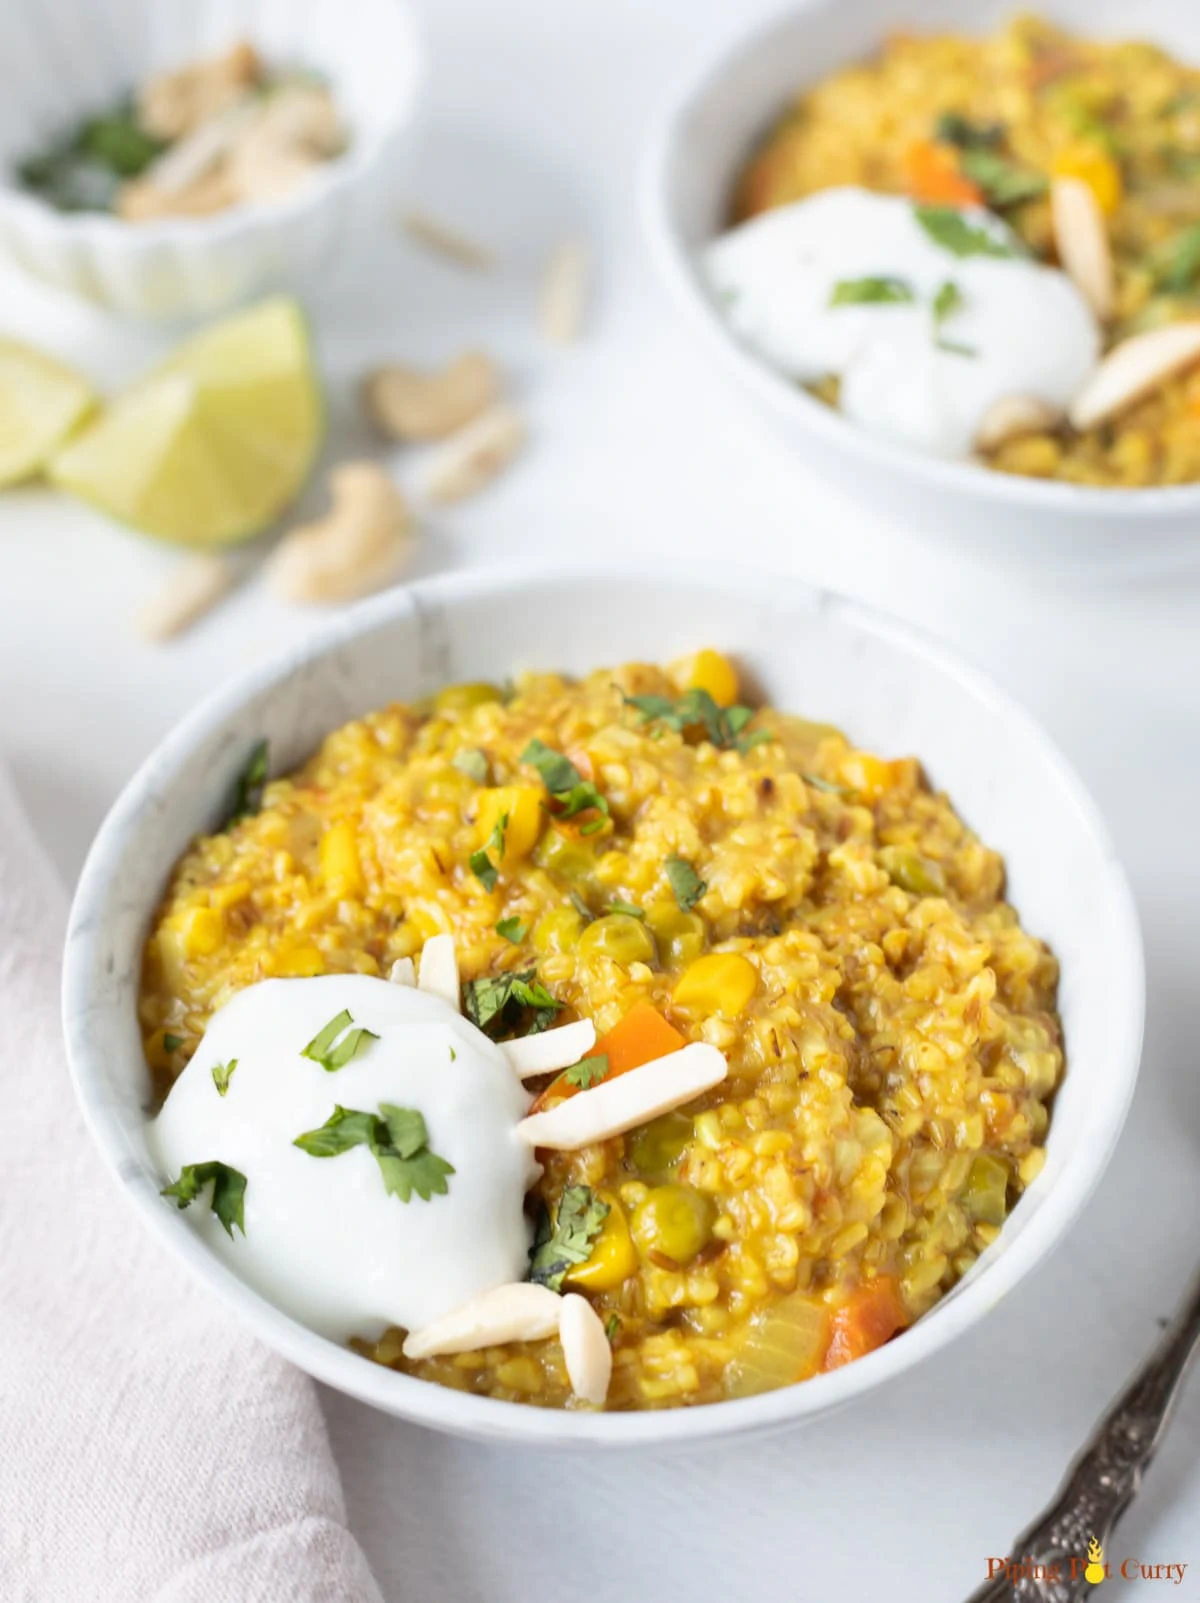 Savory oatmeal with veggies and spices in a bowl along with yogurt